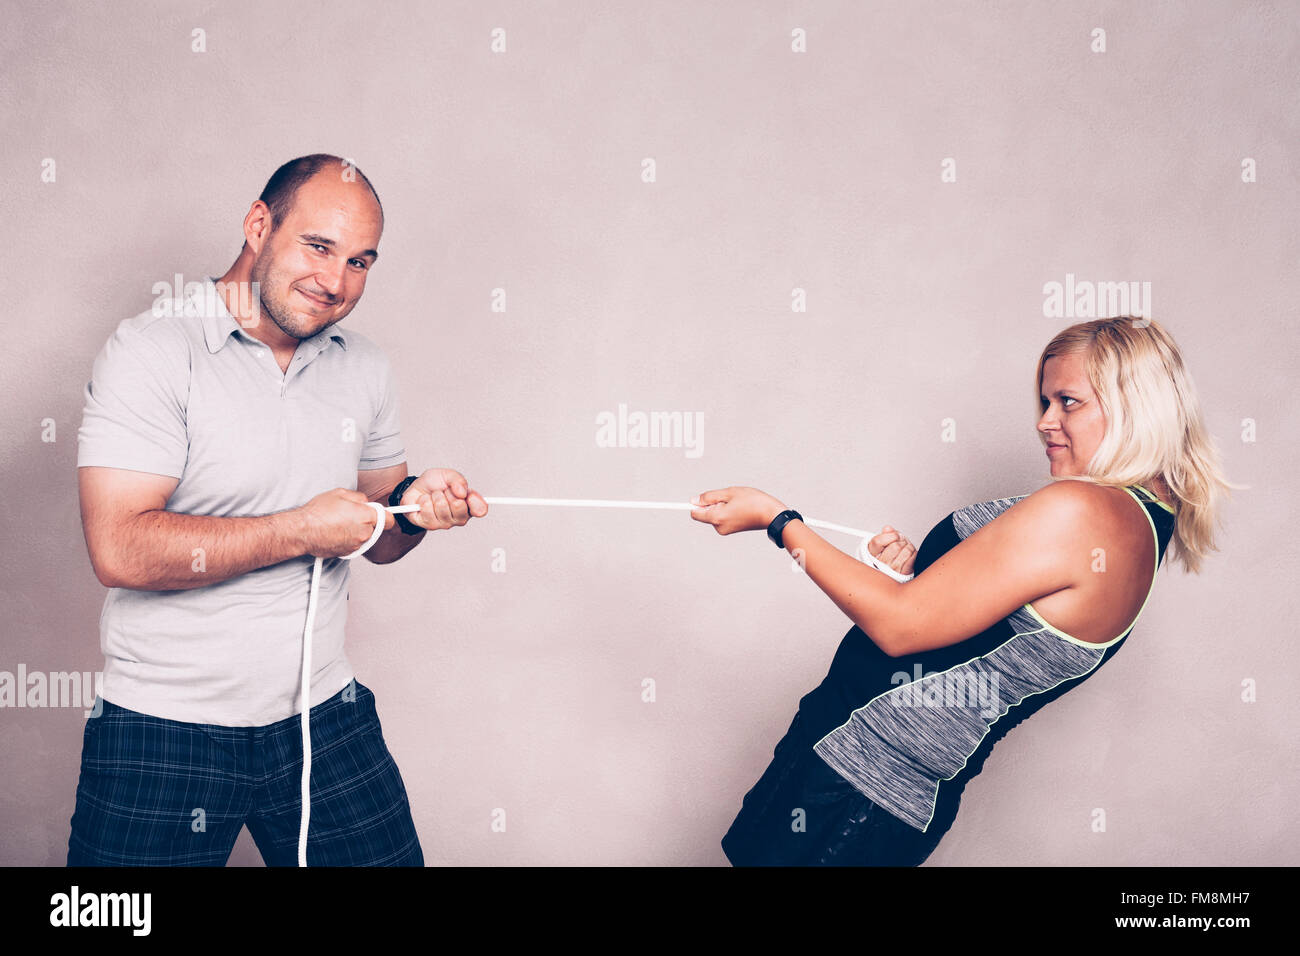 Positive confident sporty man and woman pulling a rope. Competition, confidence and effort concept. Stock Photo